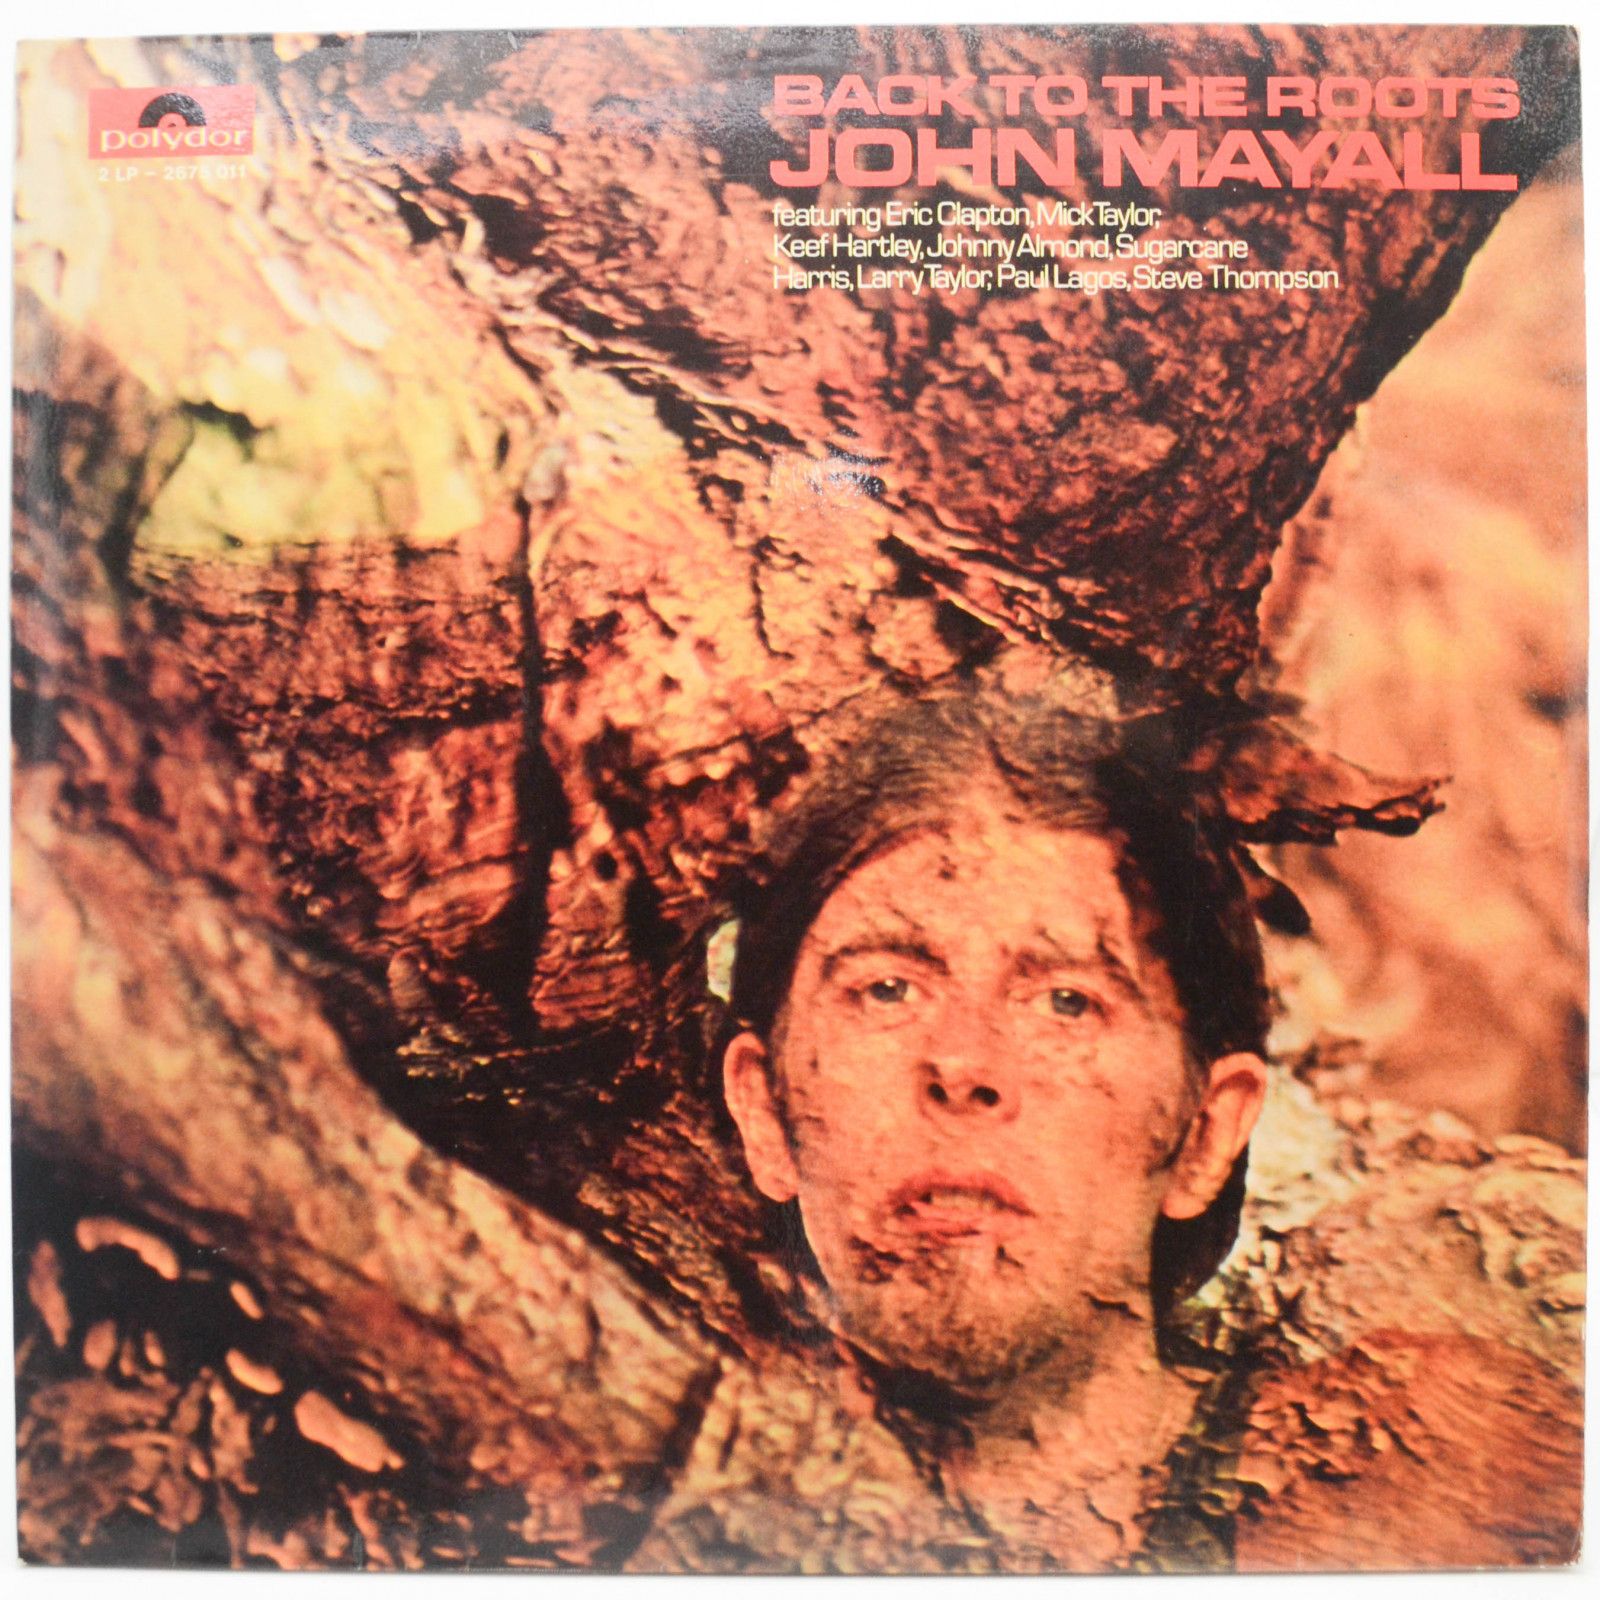 John Mayall — Back To The Roots (2LP), 1971